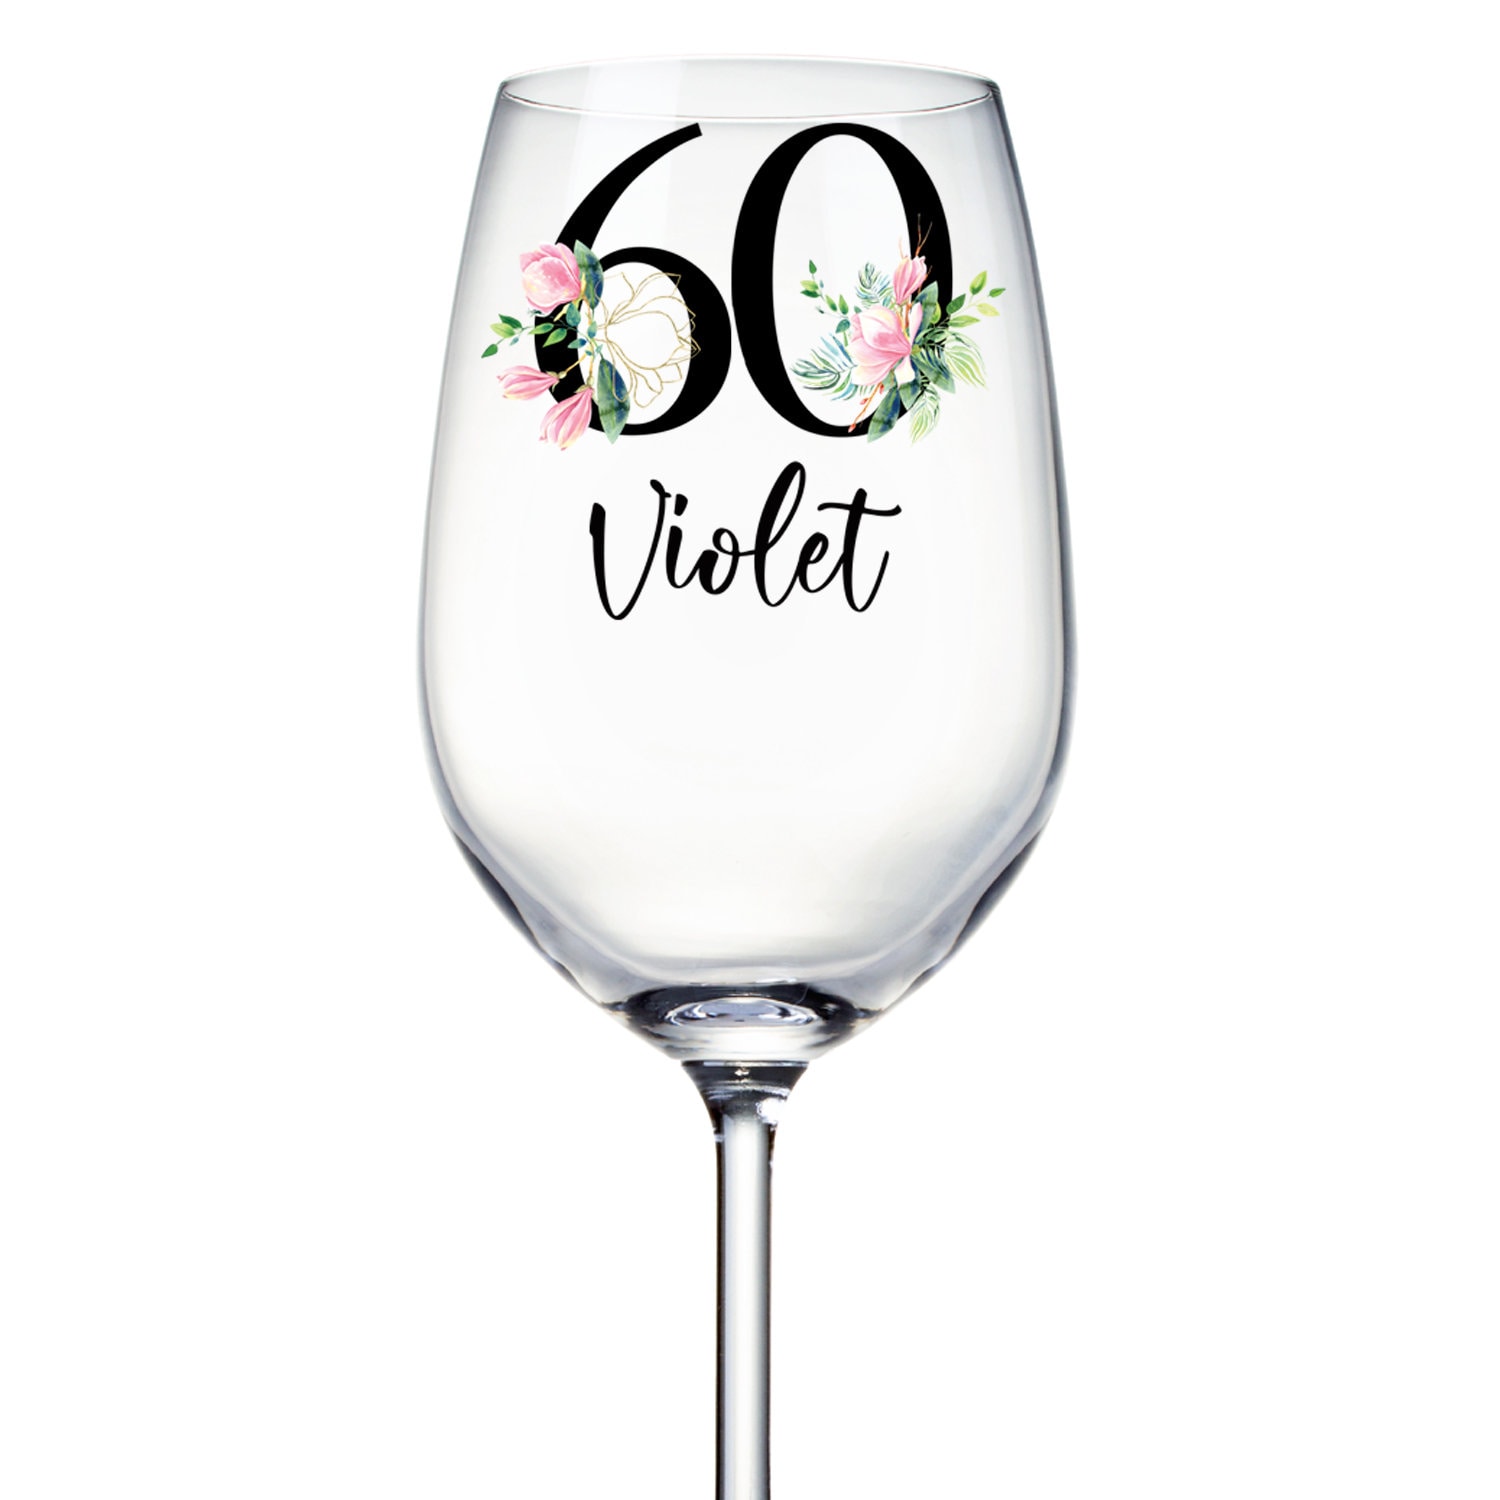 Painted Wine Glasses, Birthday Present, Fancy Wine Glasses, 60th